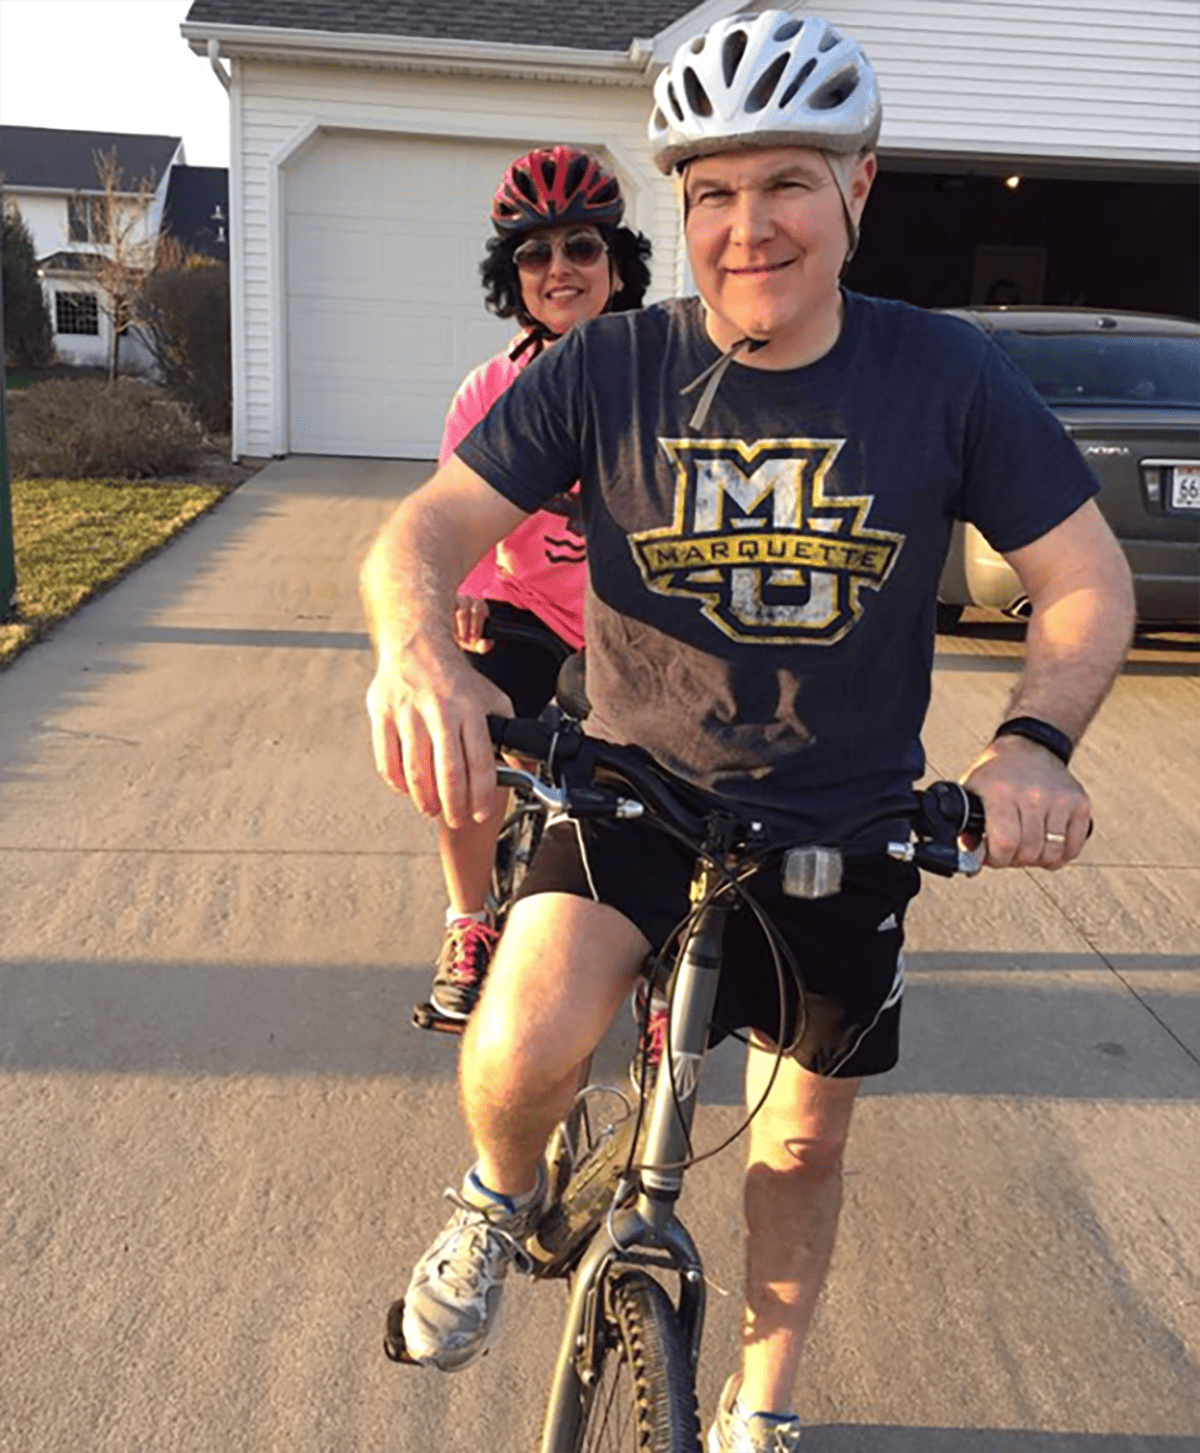 Husband & wife on a tandem bike in front of their garage